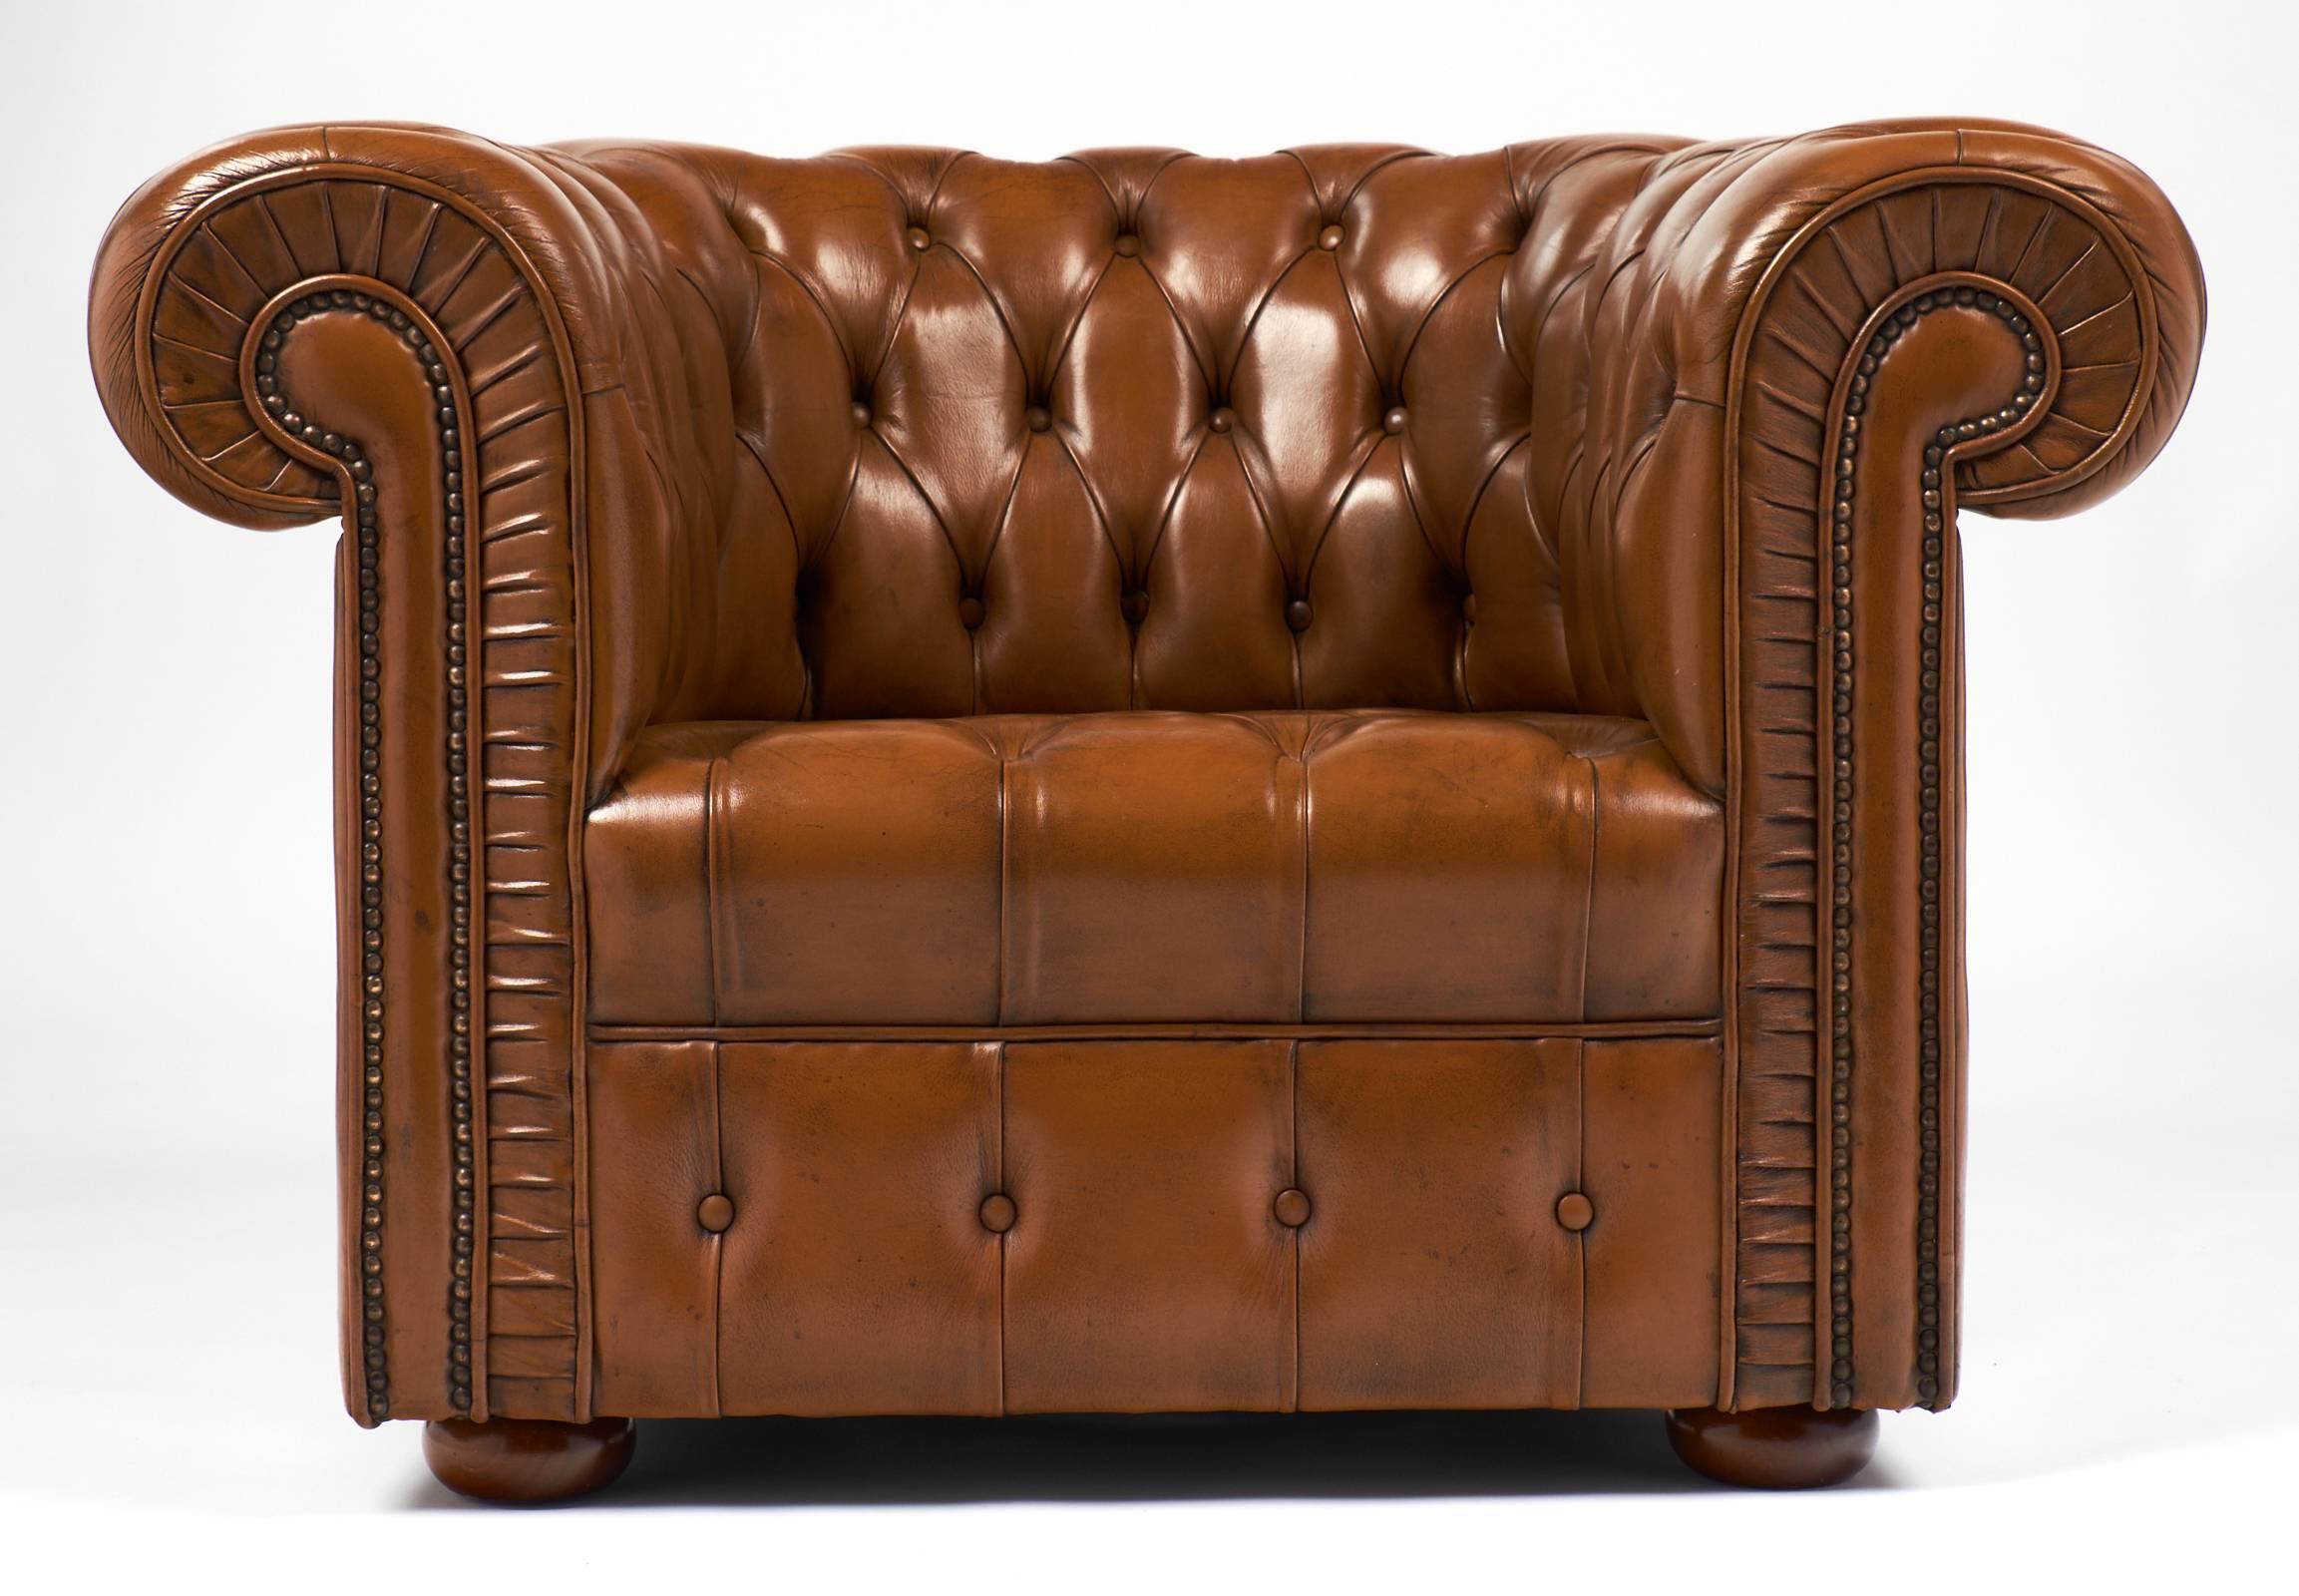 English Pair of Vintage Cognac Leather Chesterfield Club Chairs